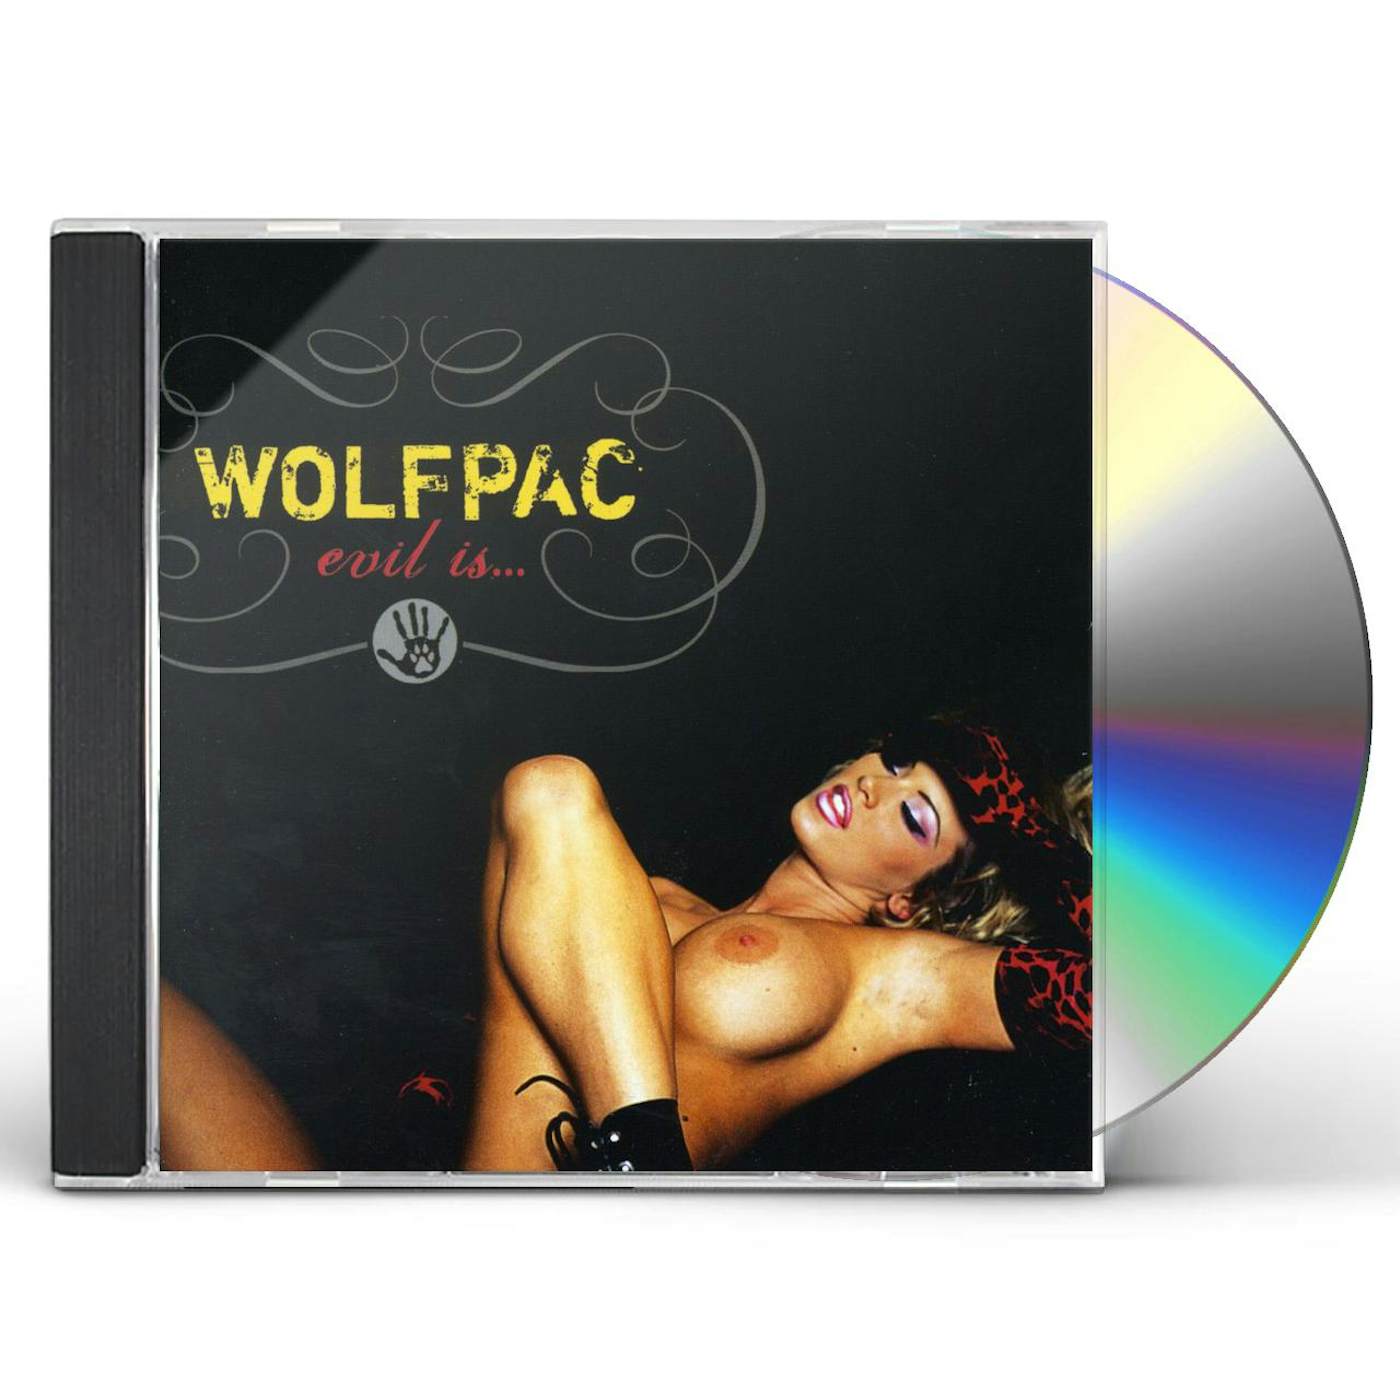 Wolfpac EVIL IS CD